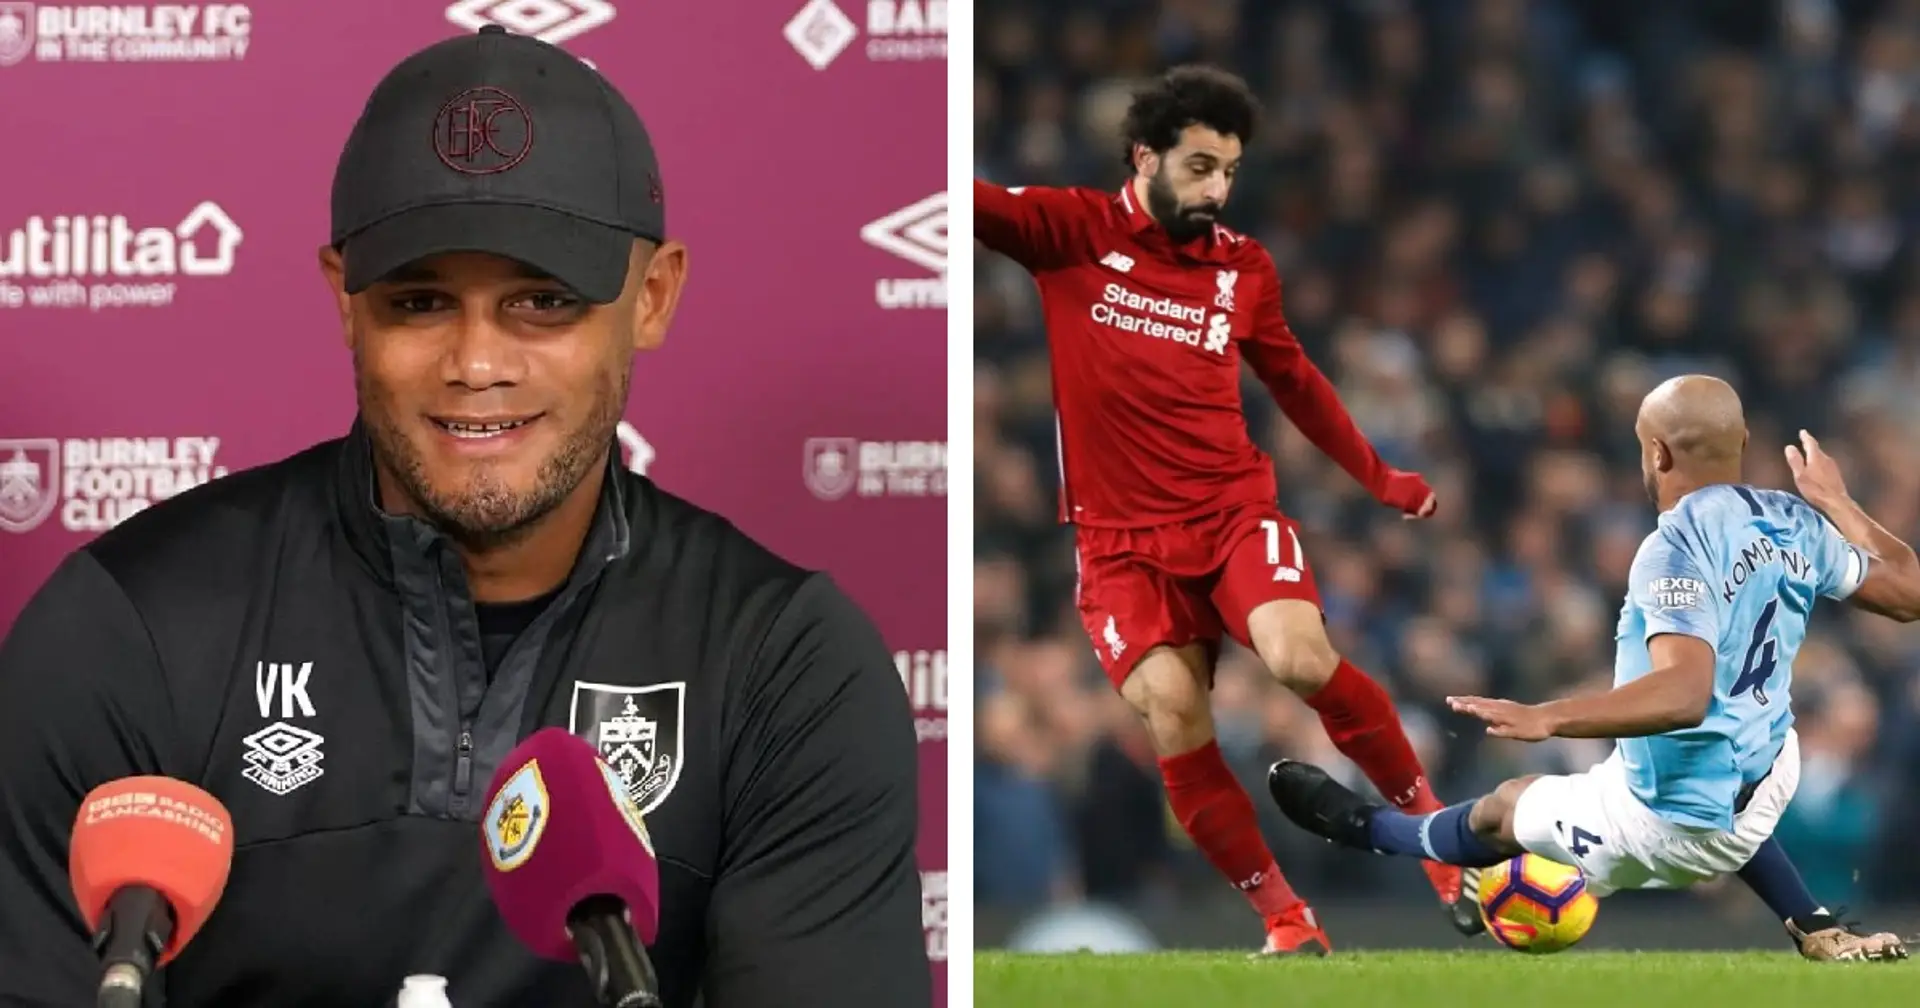 'There's no doubt': Kompany claims Liverpool getting back to levels of intensity of the team he faced as a player